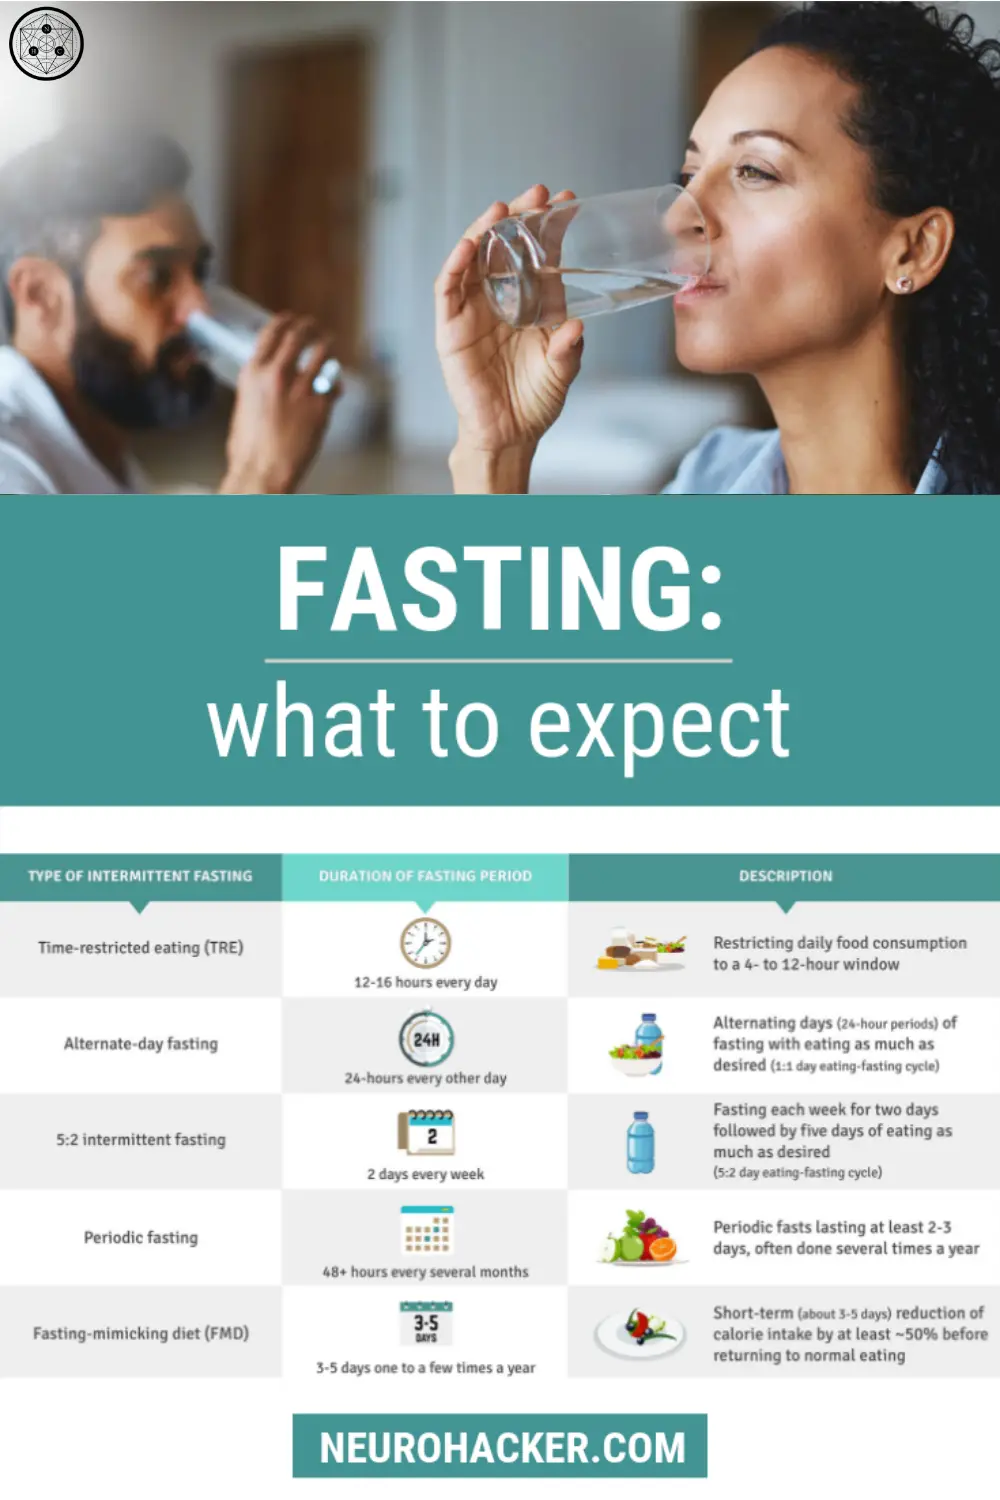 What to Expect When Fasting